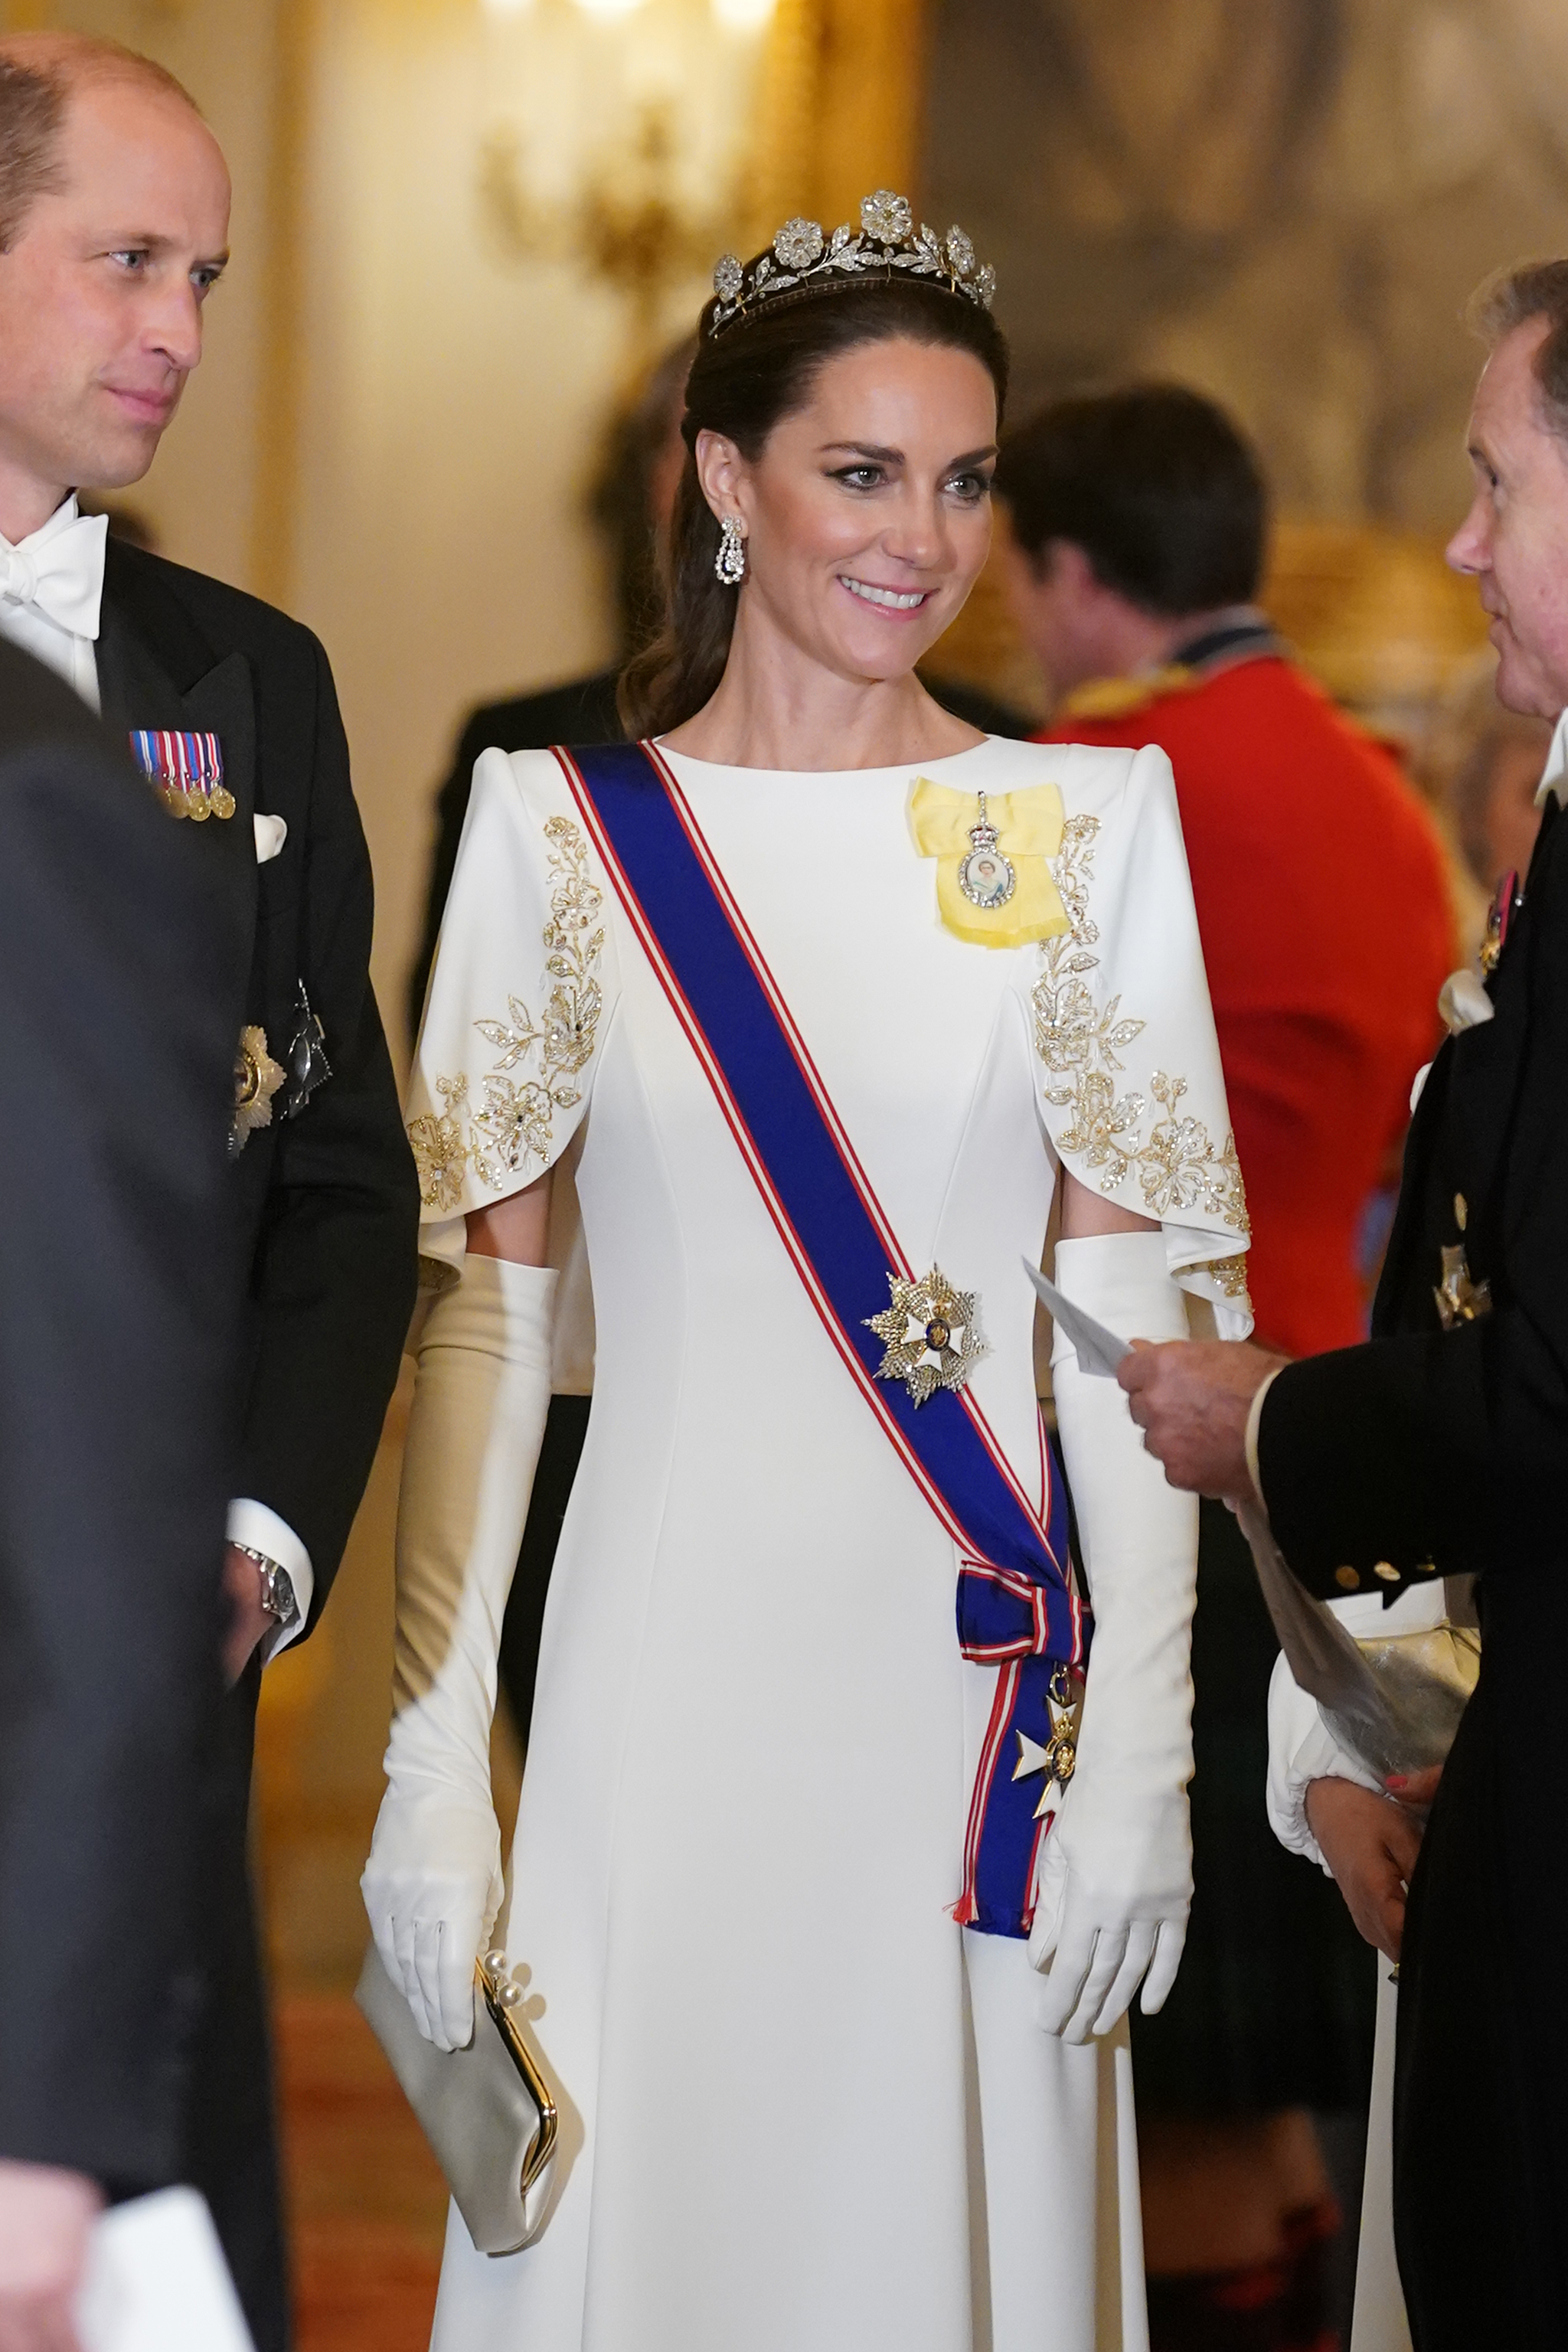 Kate Middleton in a gown with embroidered sleeves and a tiara, at a formal event